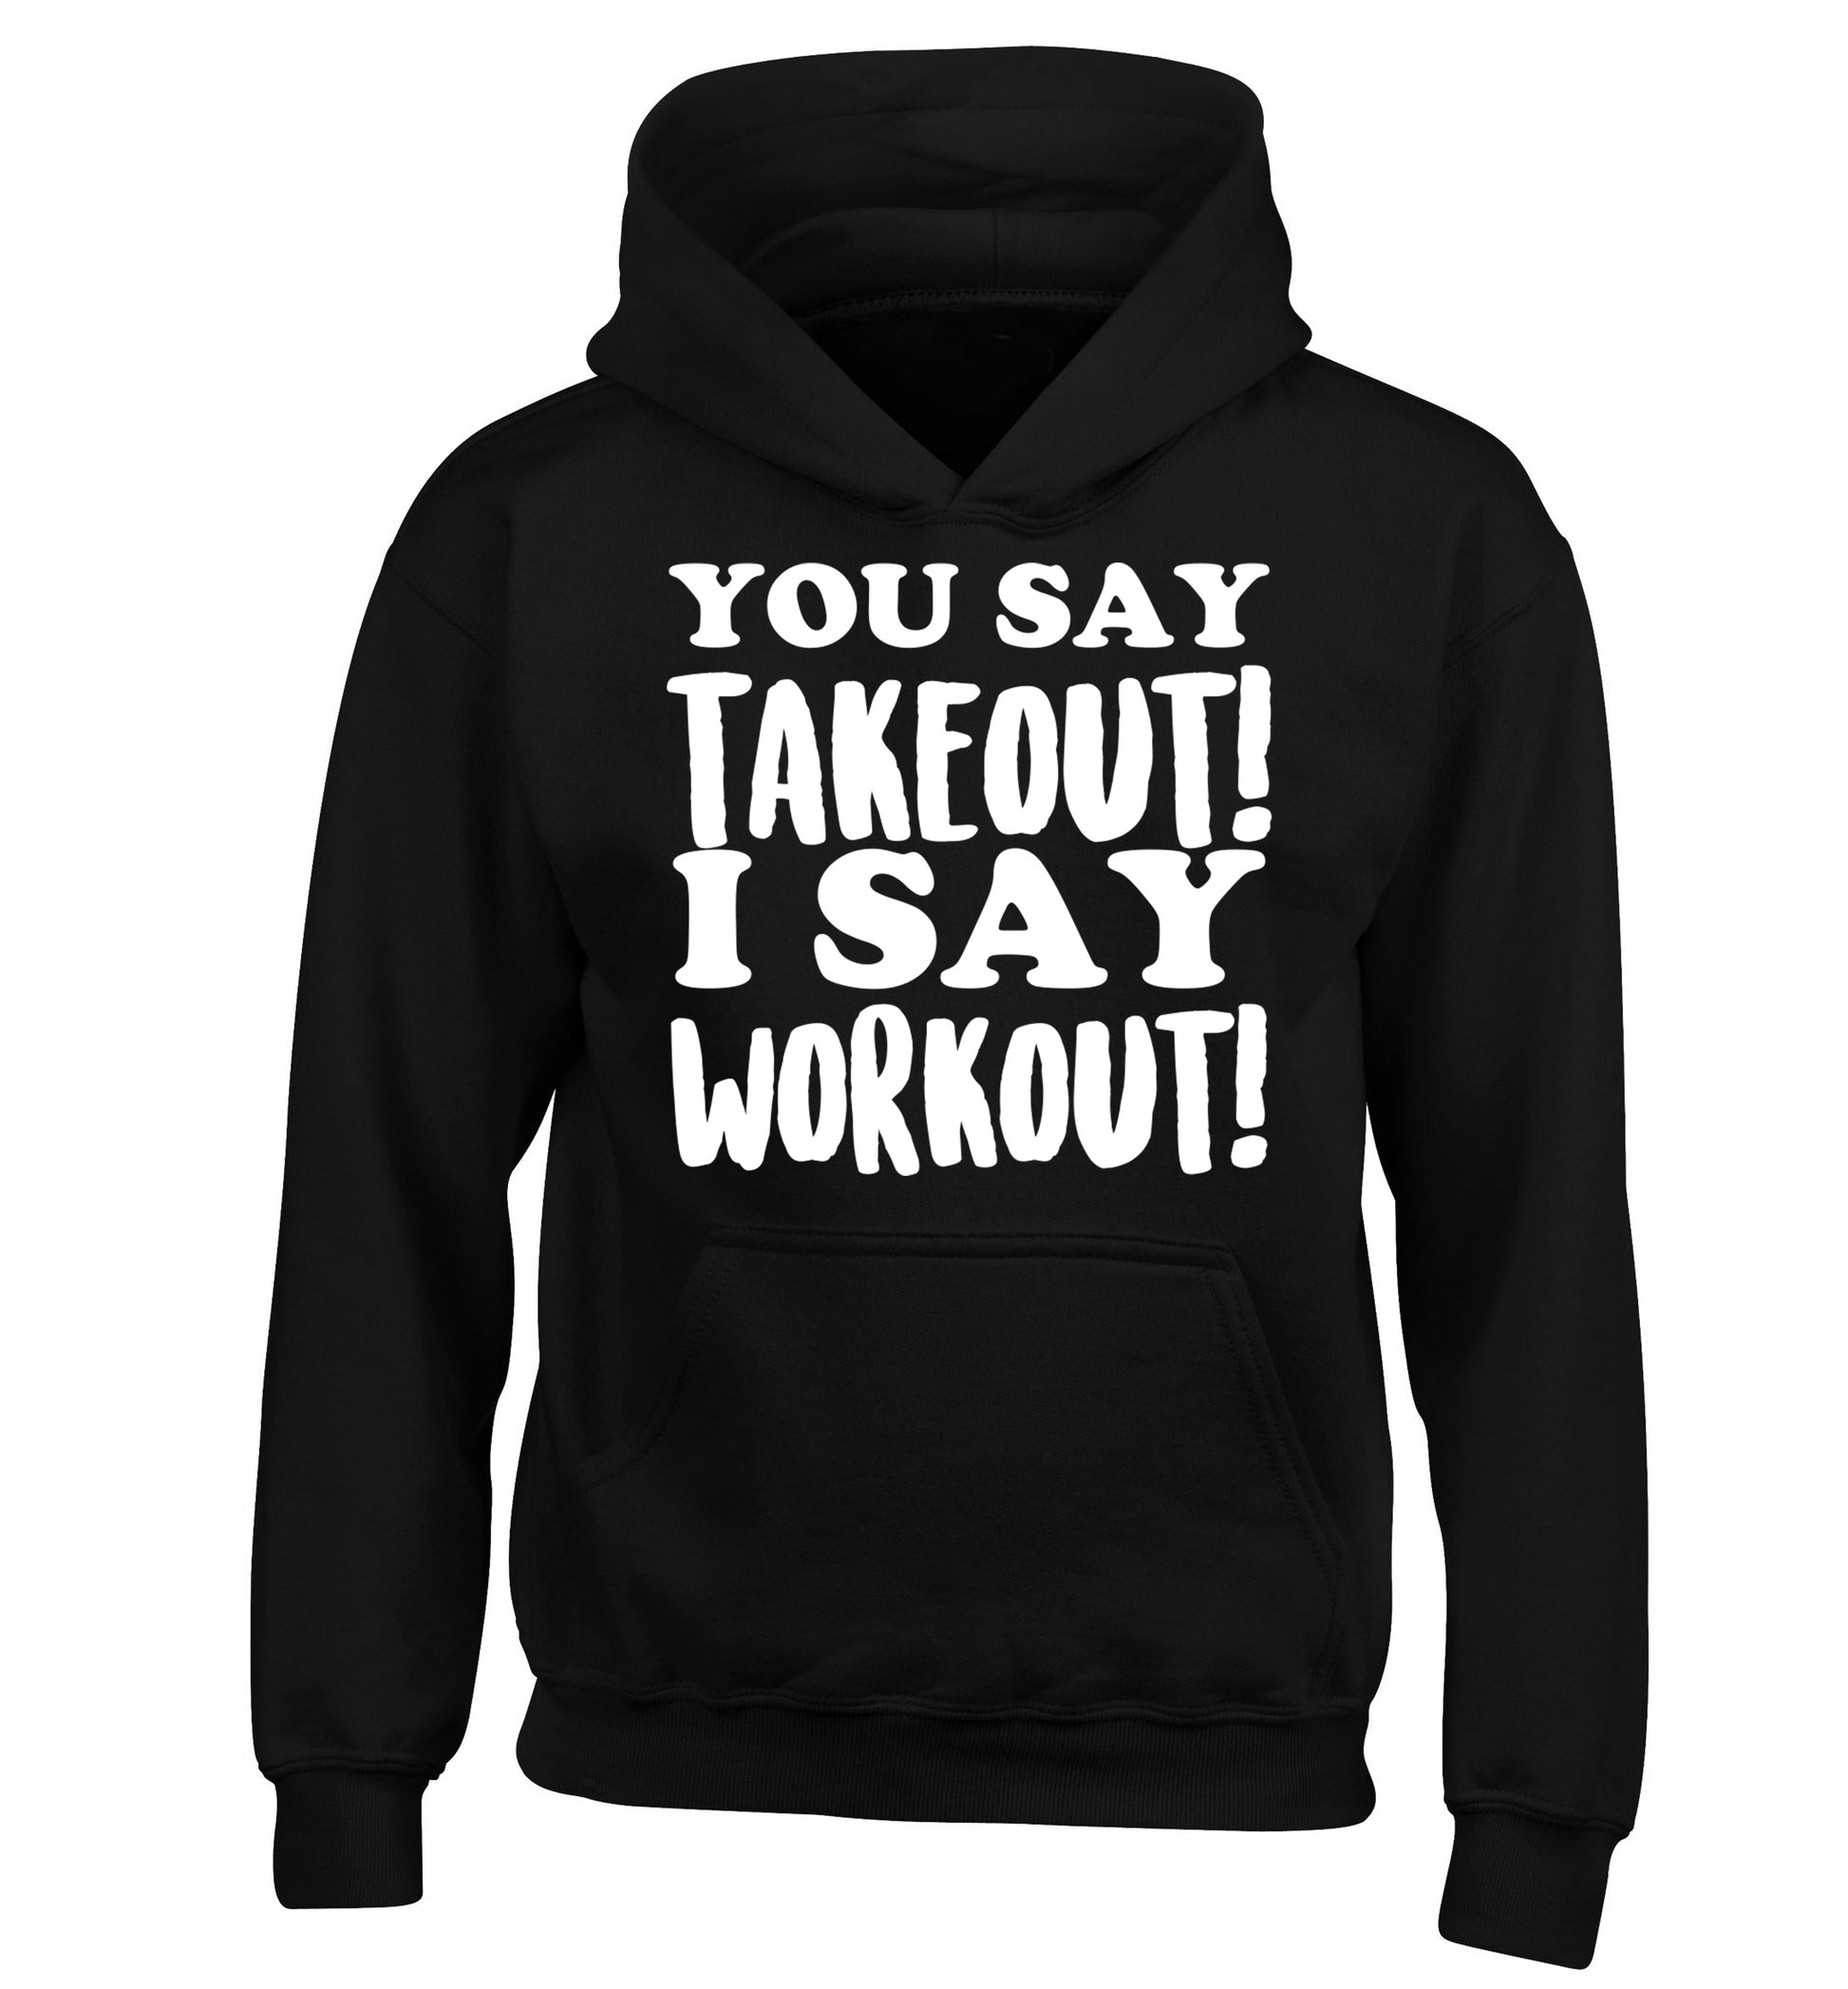 You say takeout I say workout! children's black hoodie 12-14 Years